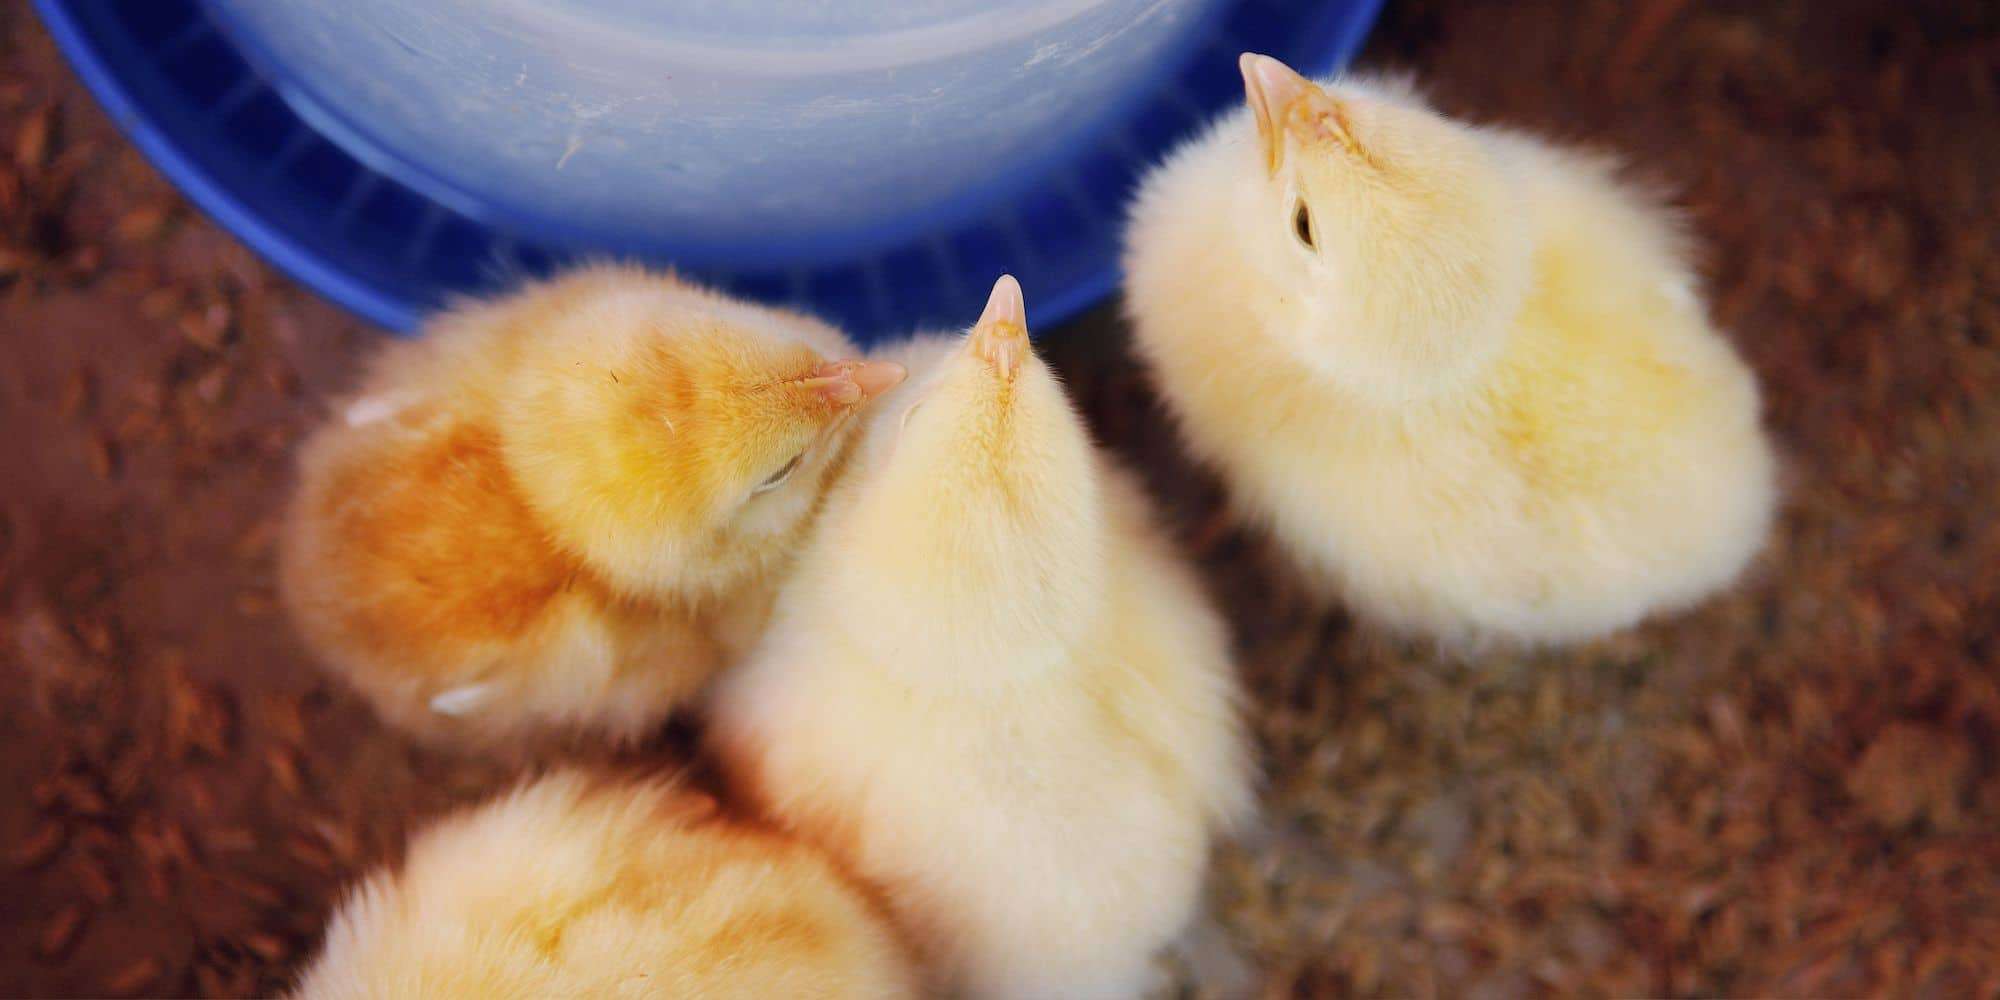 4 yellow chicks drinking water out of a blue waterer